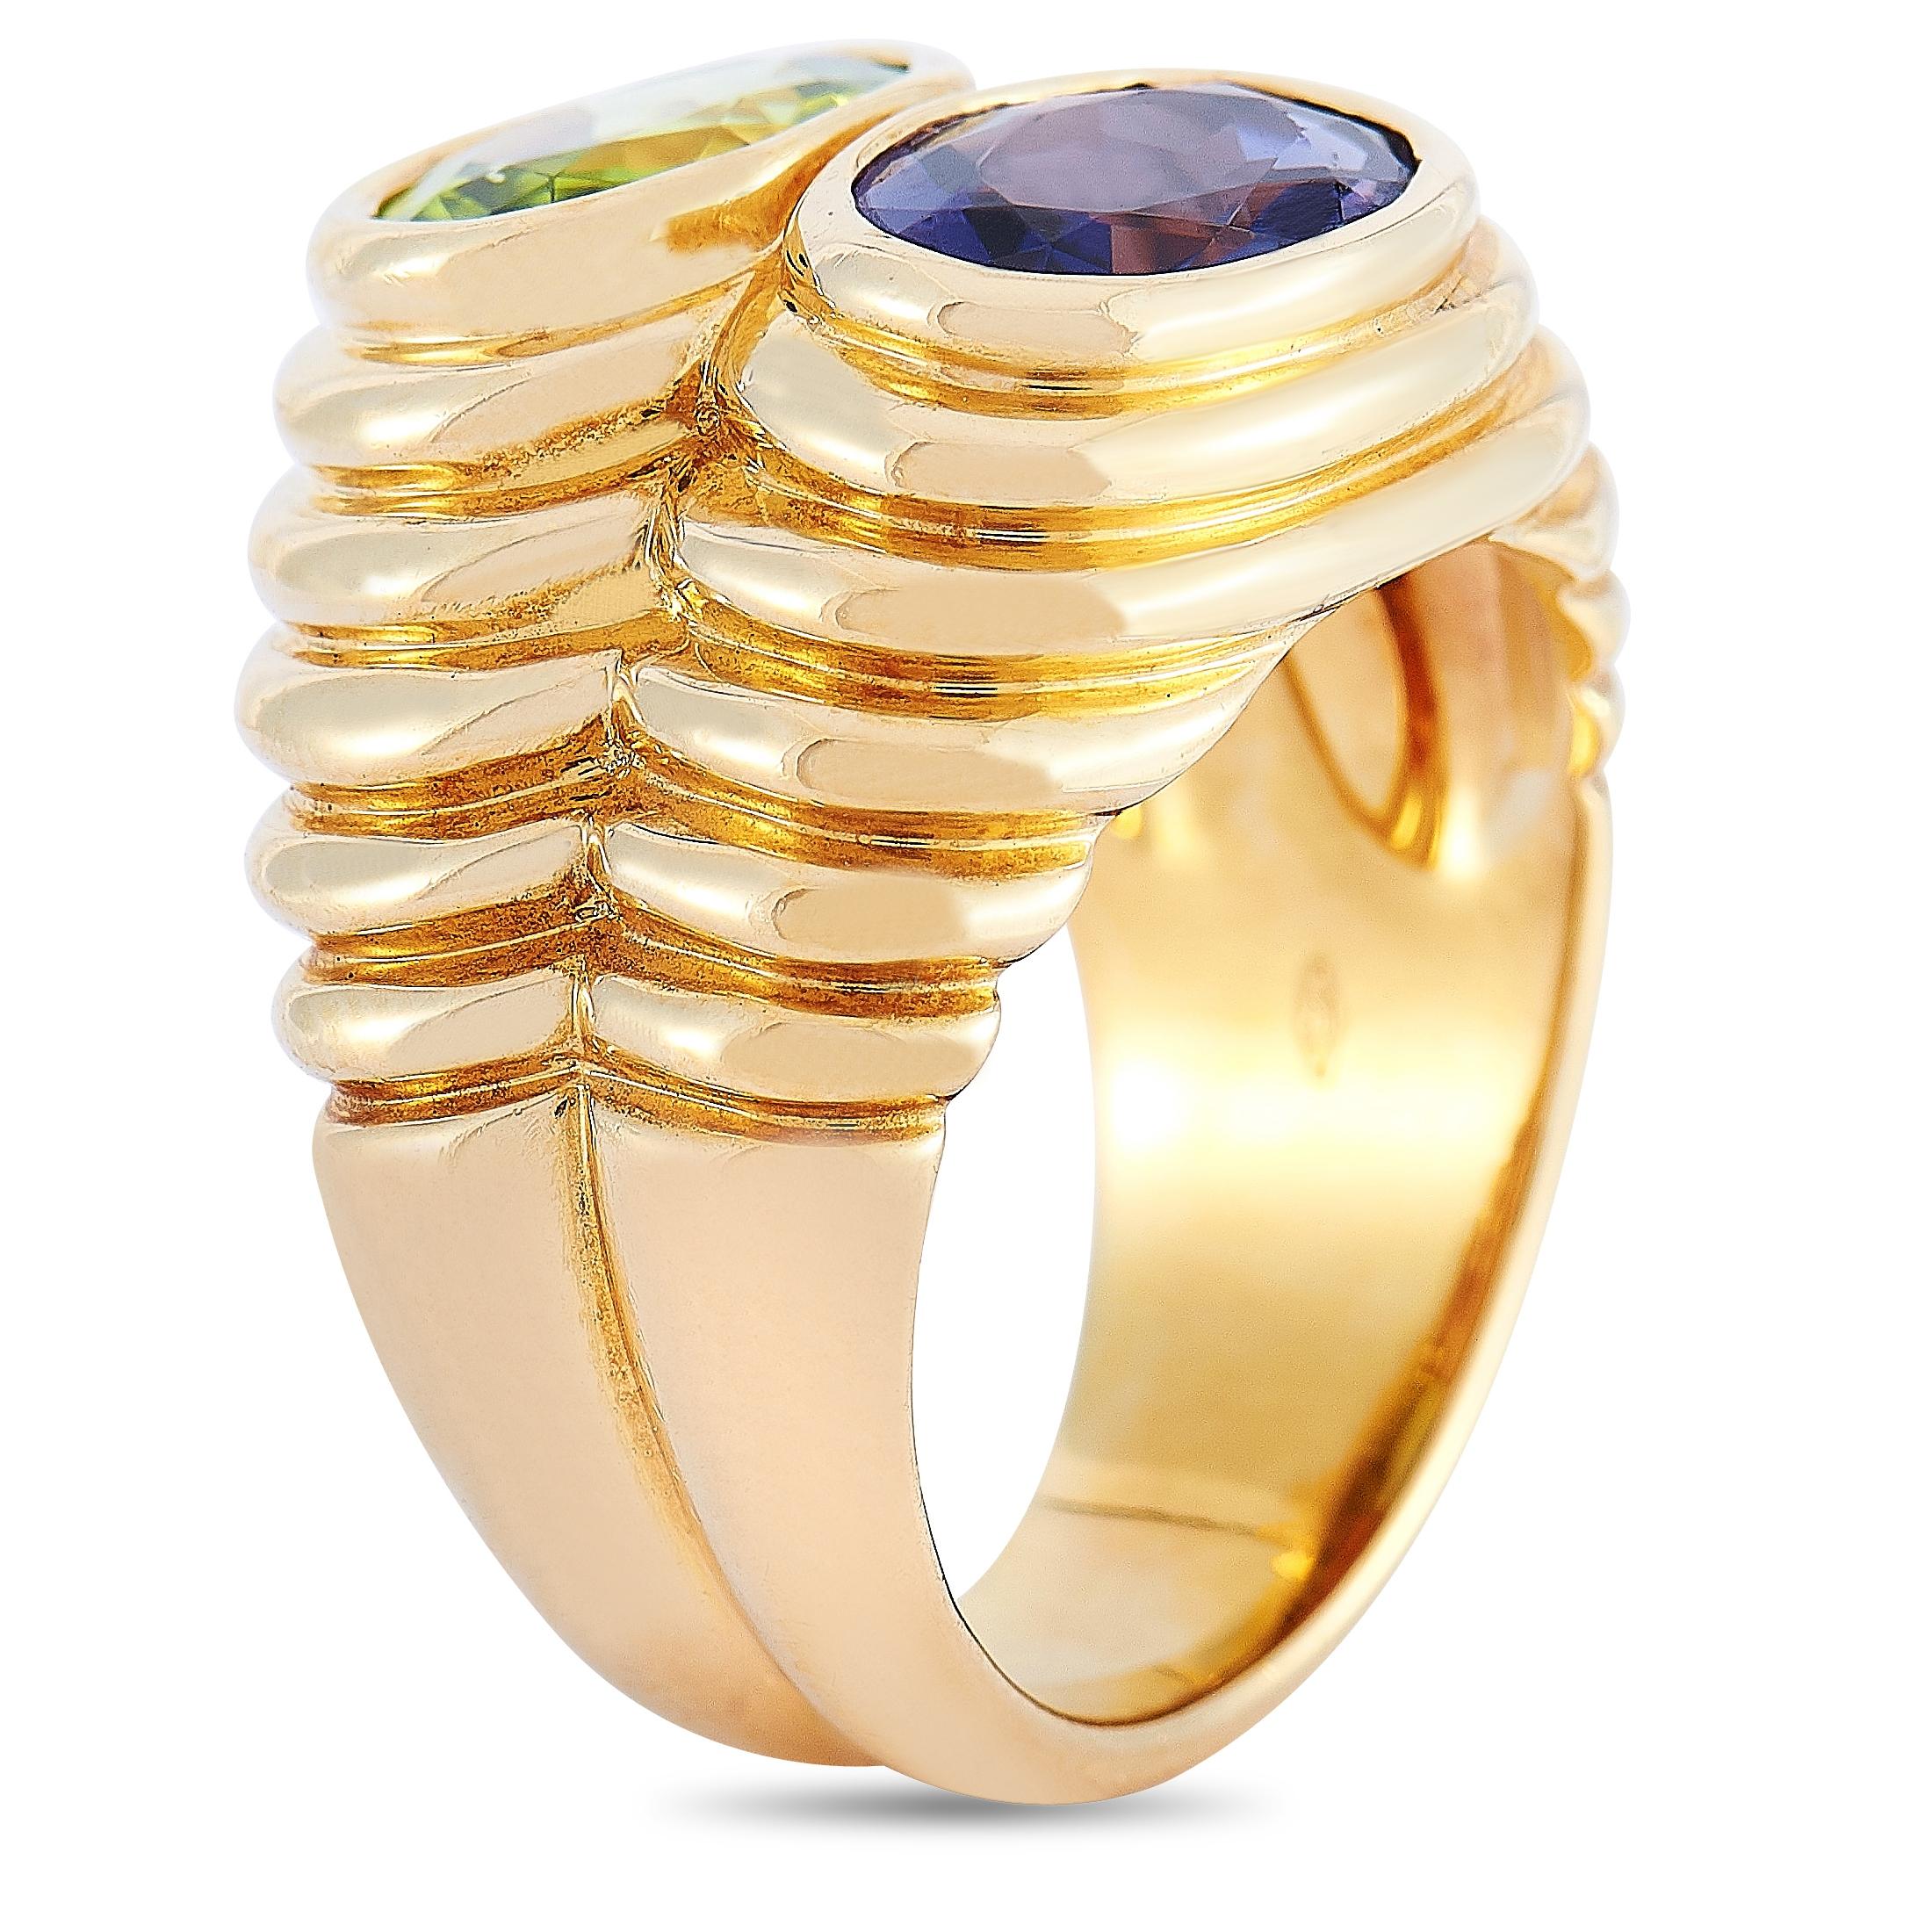 The Bvlgari “Doppio” ring is made of 18K yellow gold and embellished with a peridot and an iolite. The ring weighs 13.9 grams and boasts band thickness of 5 mm and top height of 6 mm, while top dimensions measure 10 by 15 mm.
 
 This jewelry piece